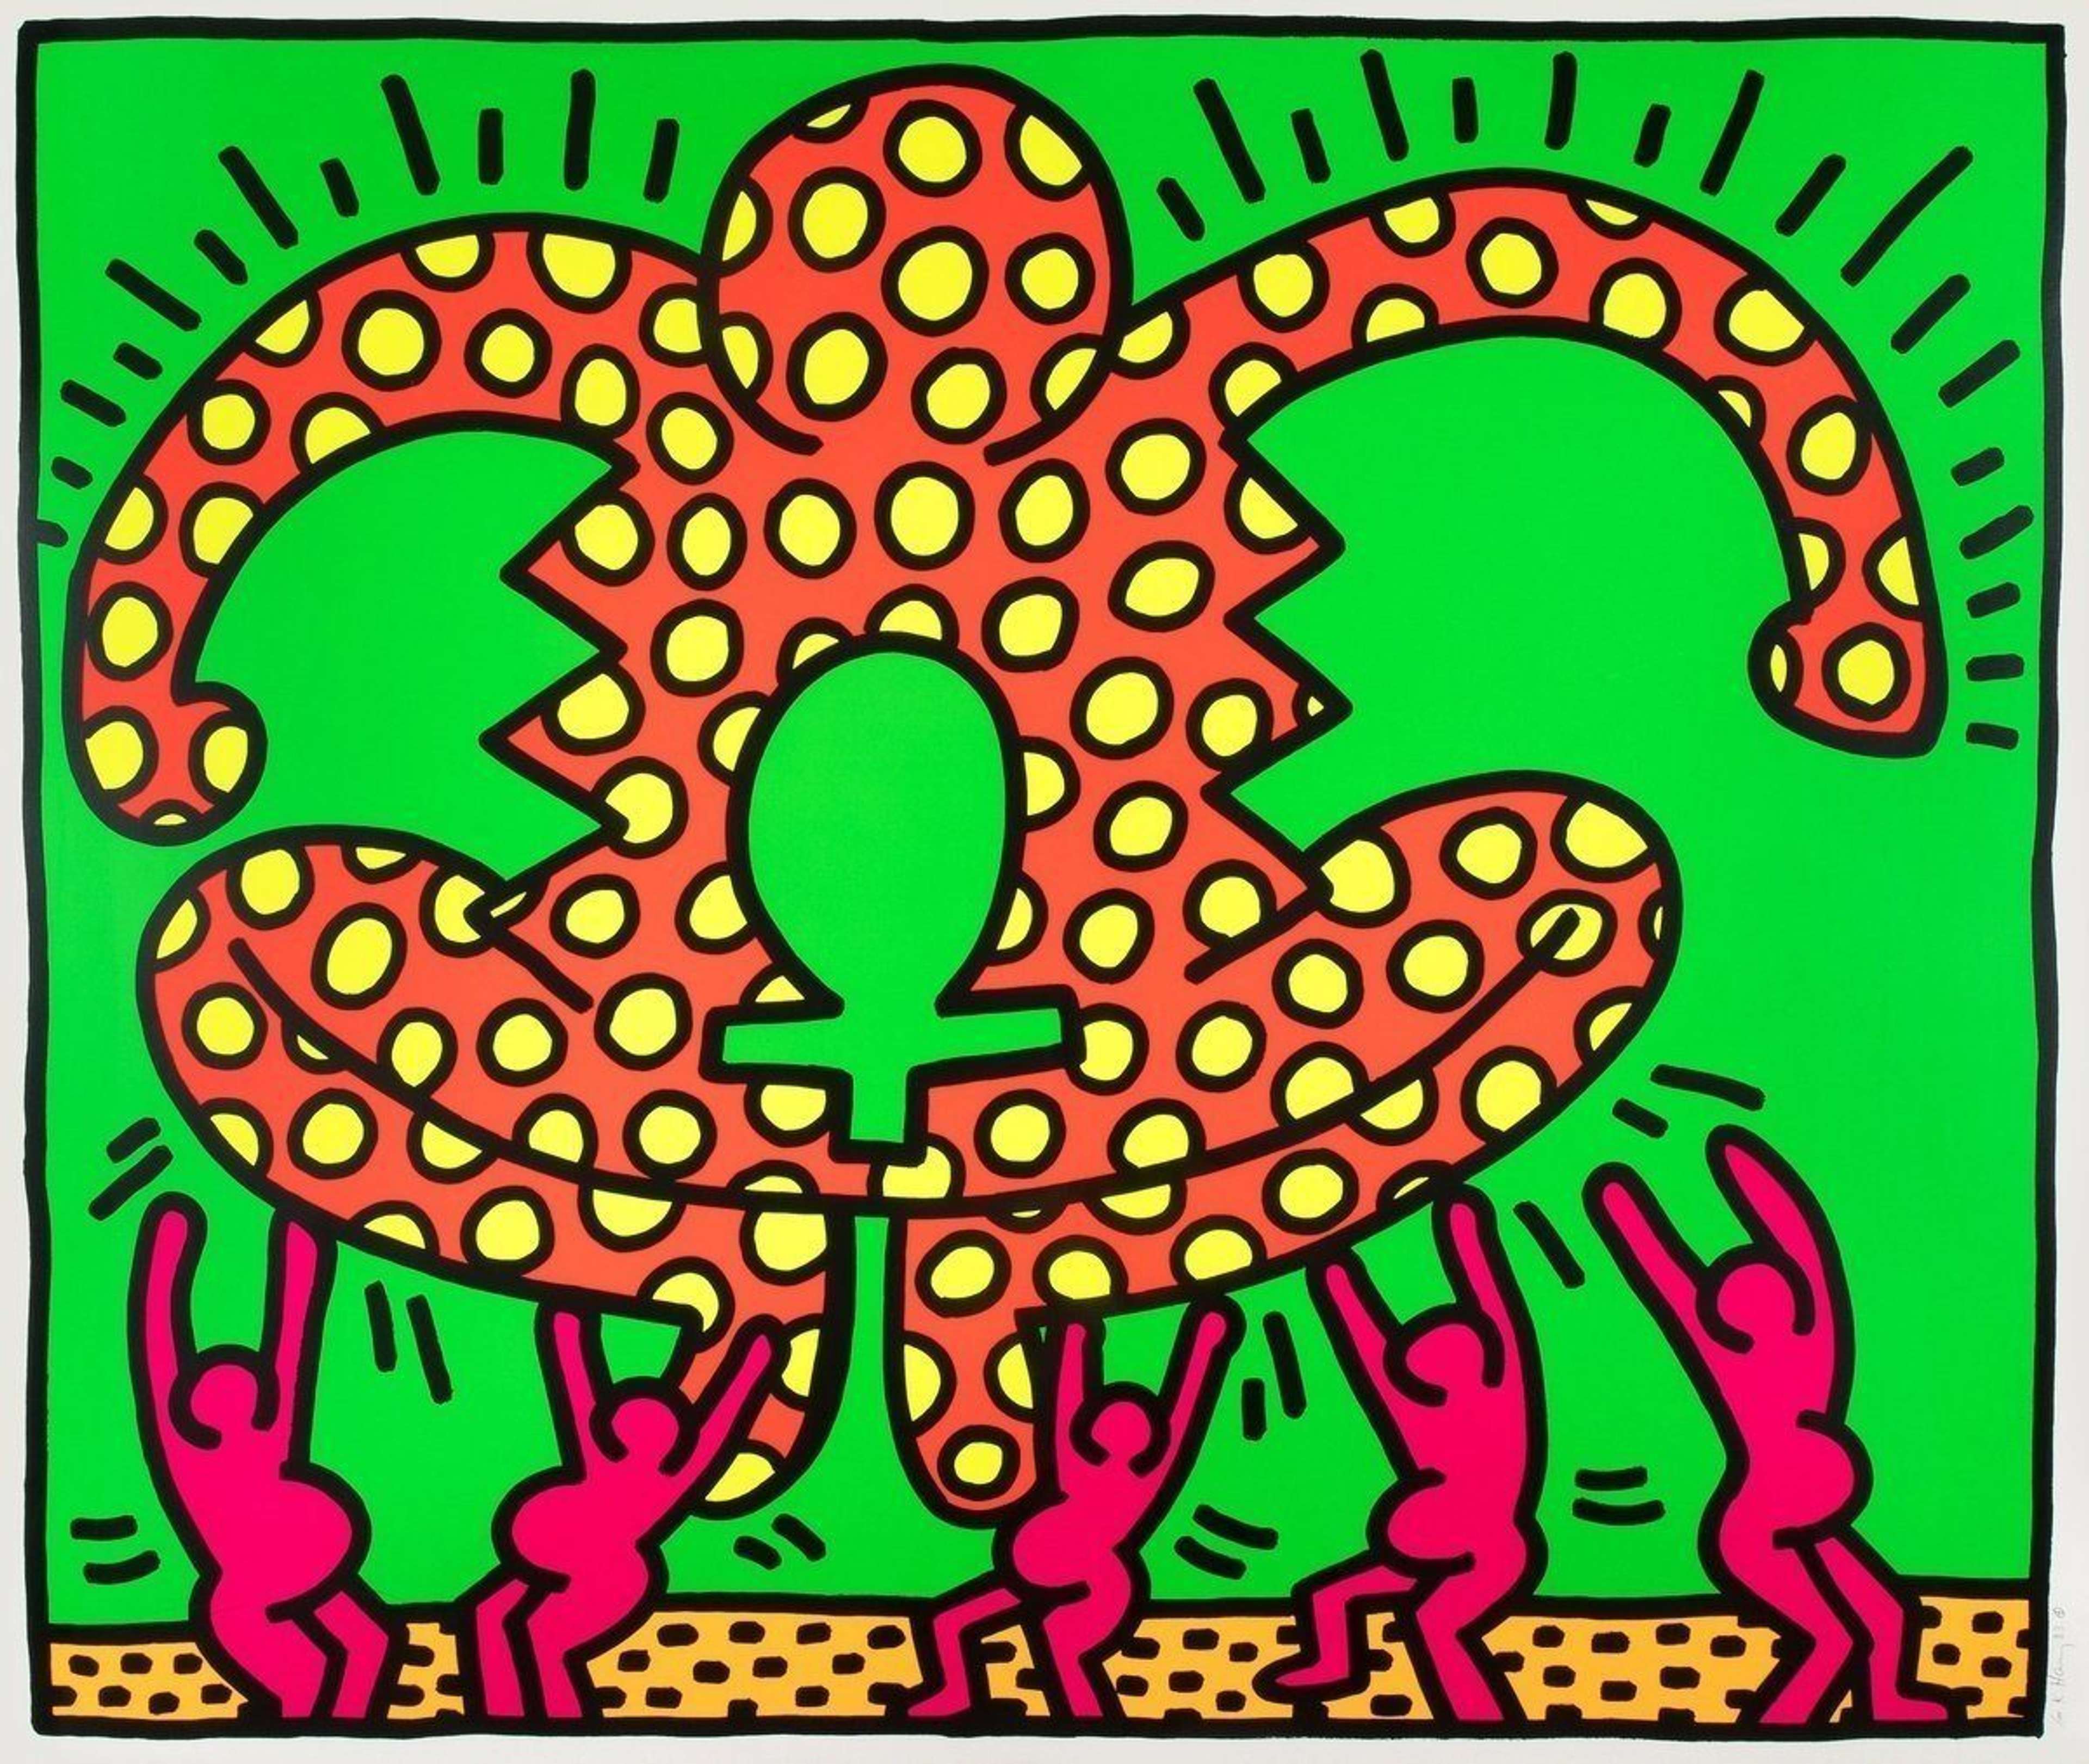 10 Facts About Keith Haring's Fertility Suite